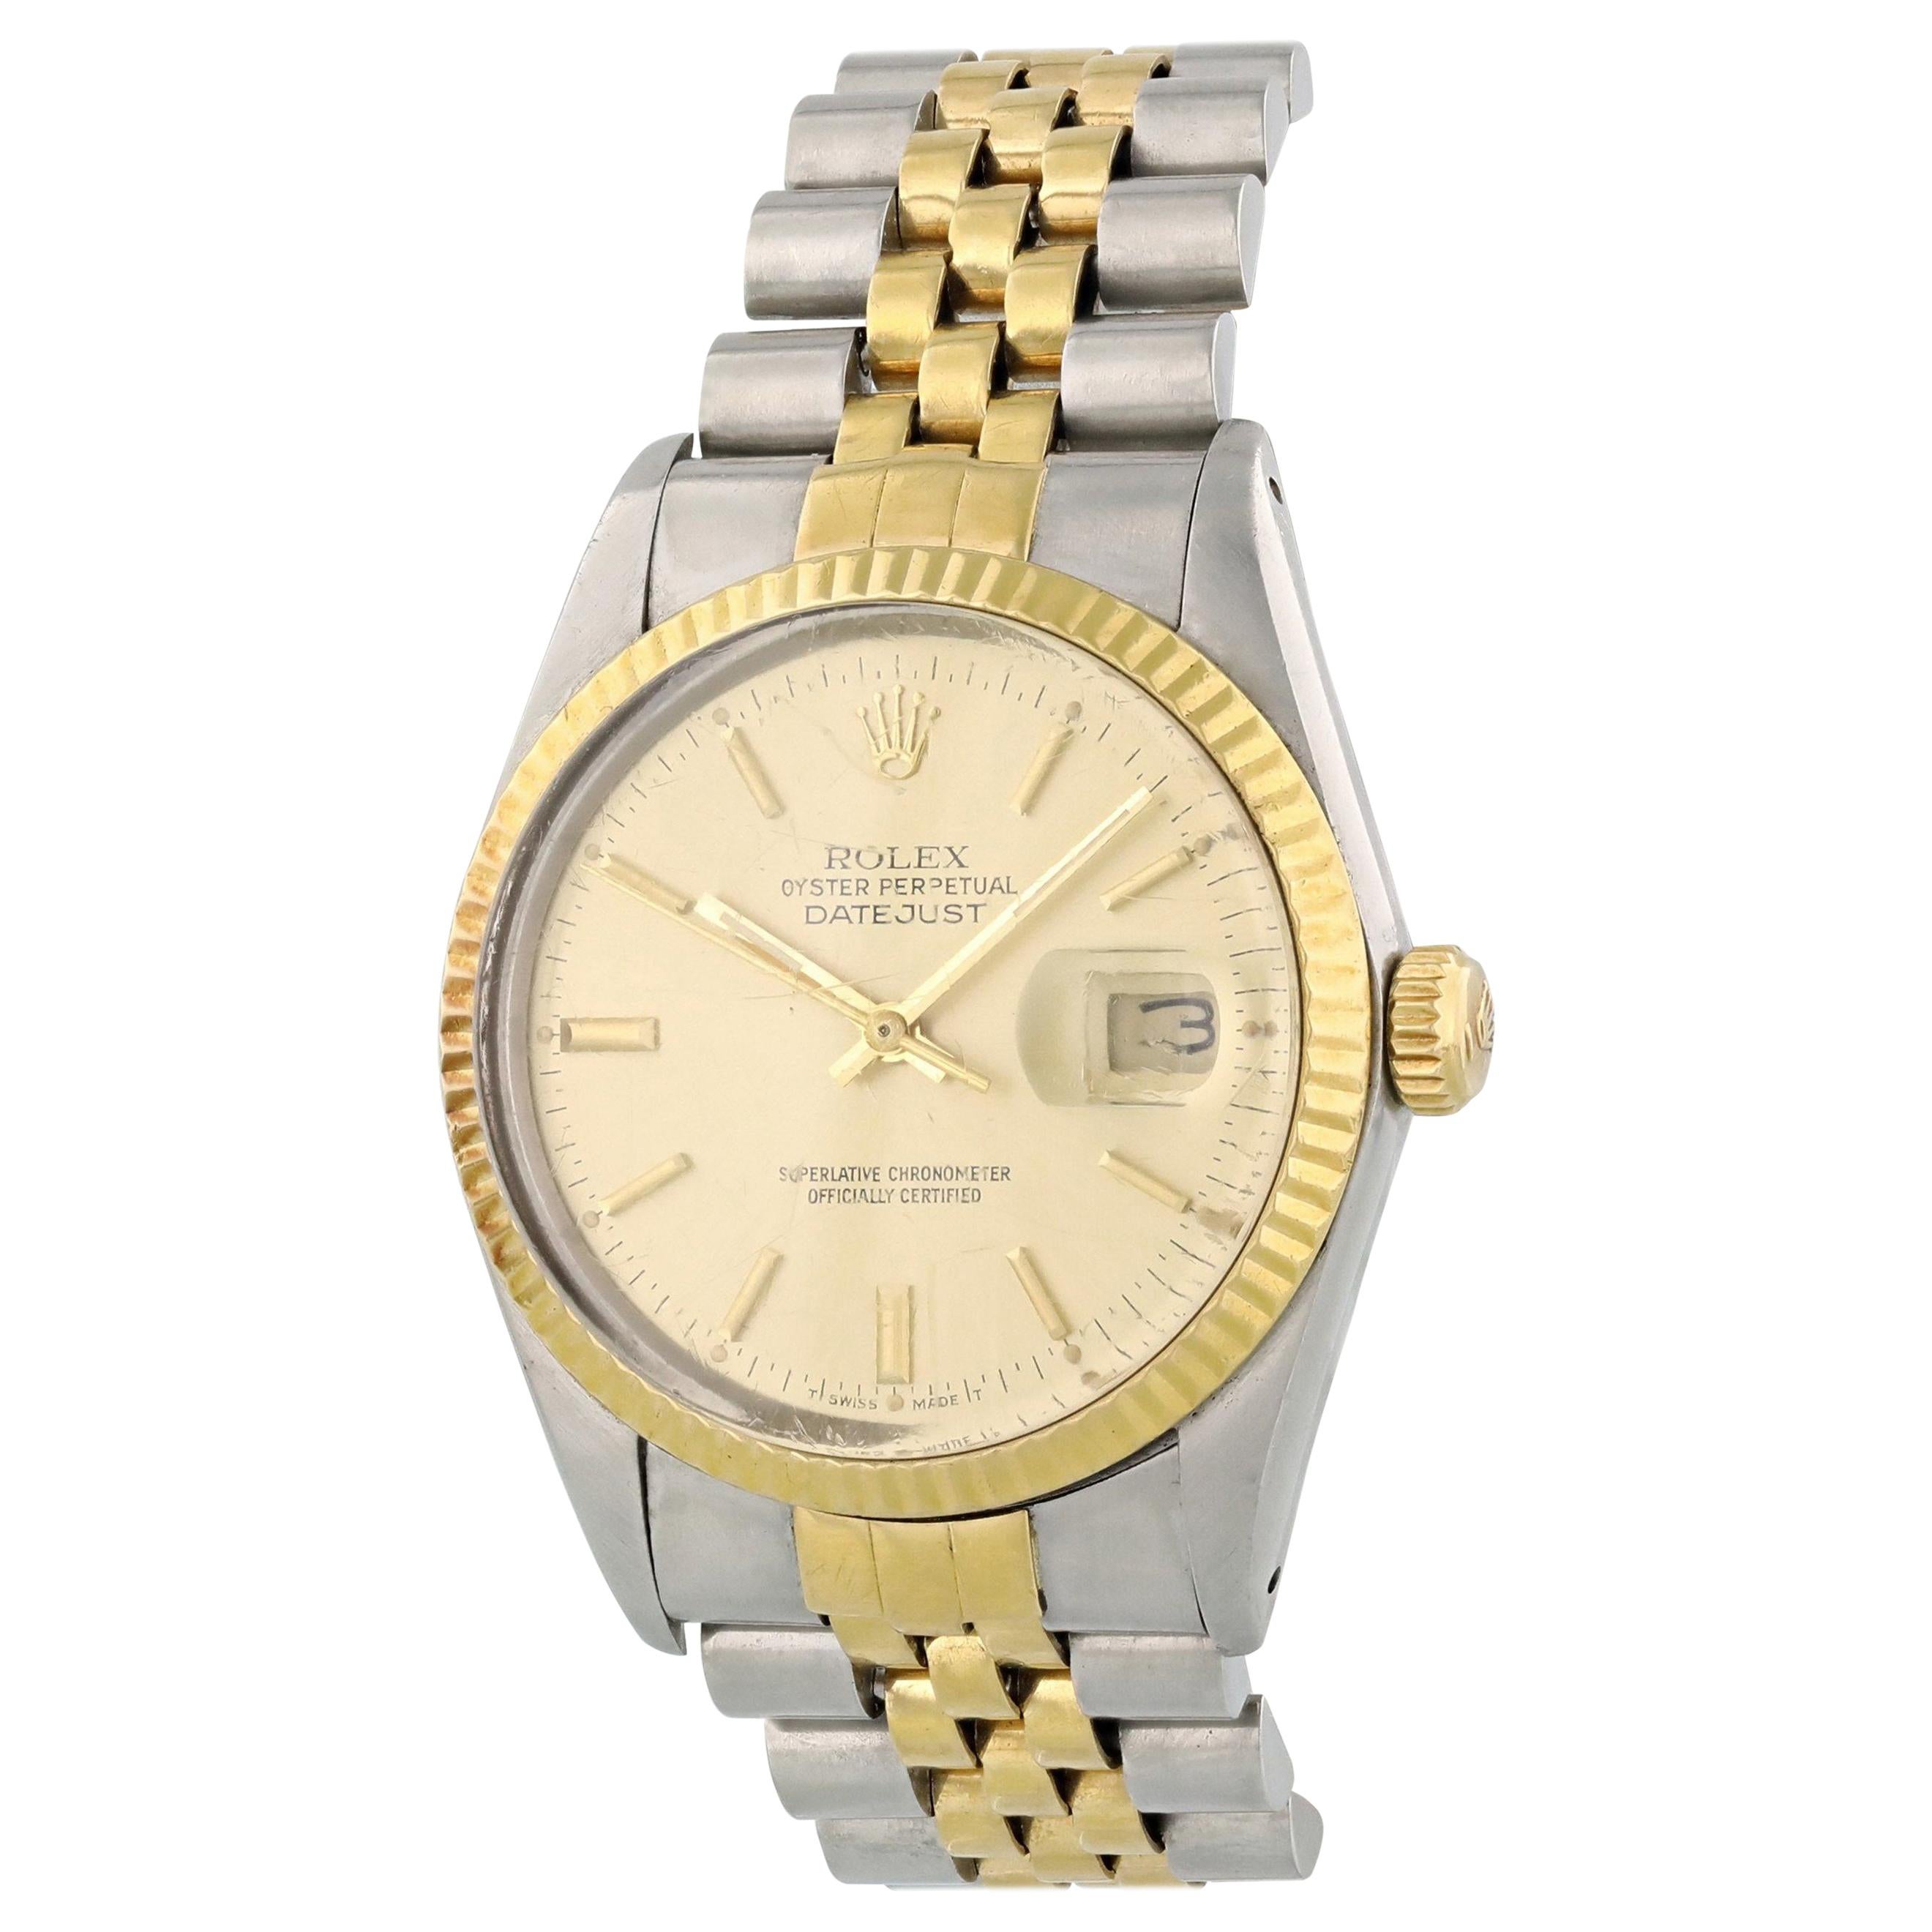 Rolex Oyster Perpetual Datejust 16013 Men's Watch For Sale